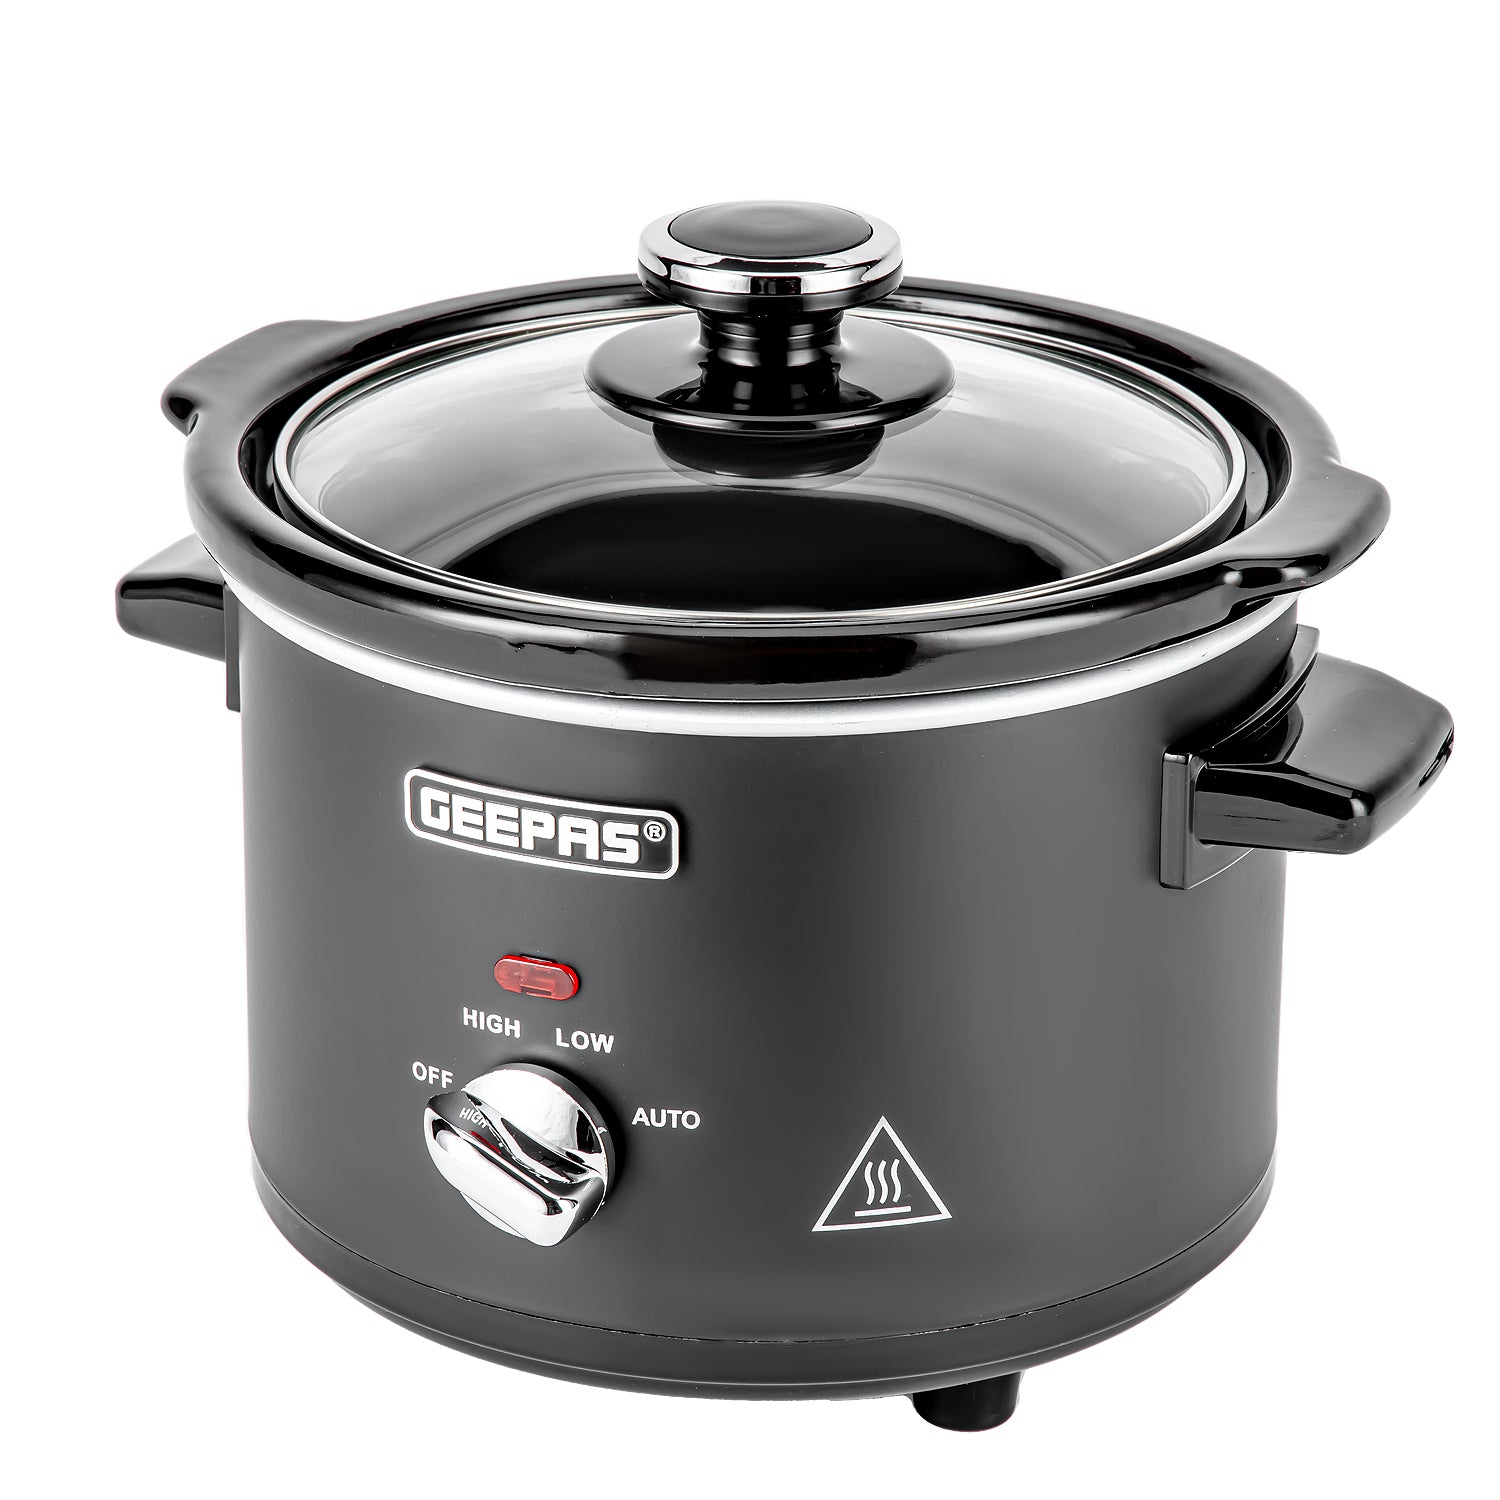 Are Slow Cookers Energy Efficient?